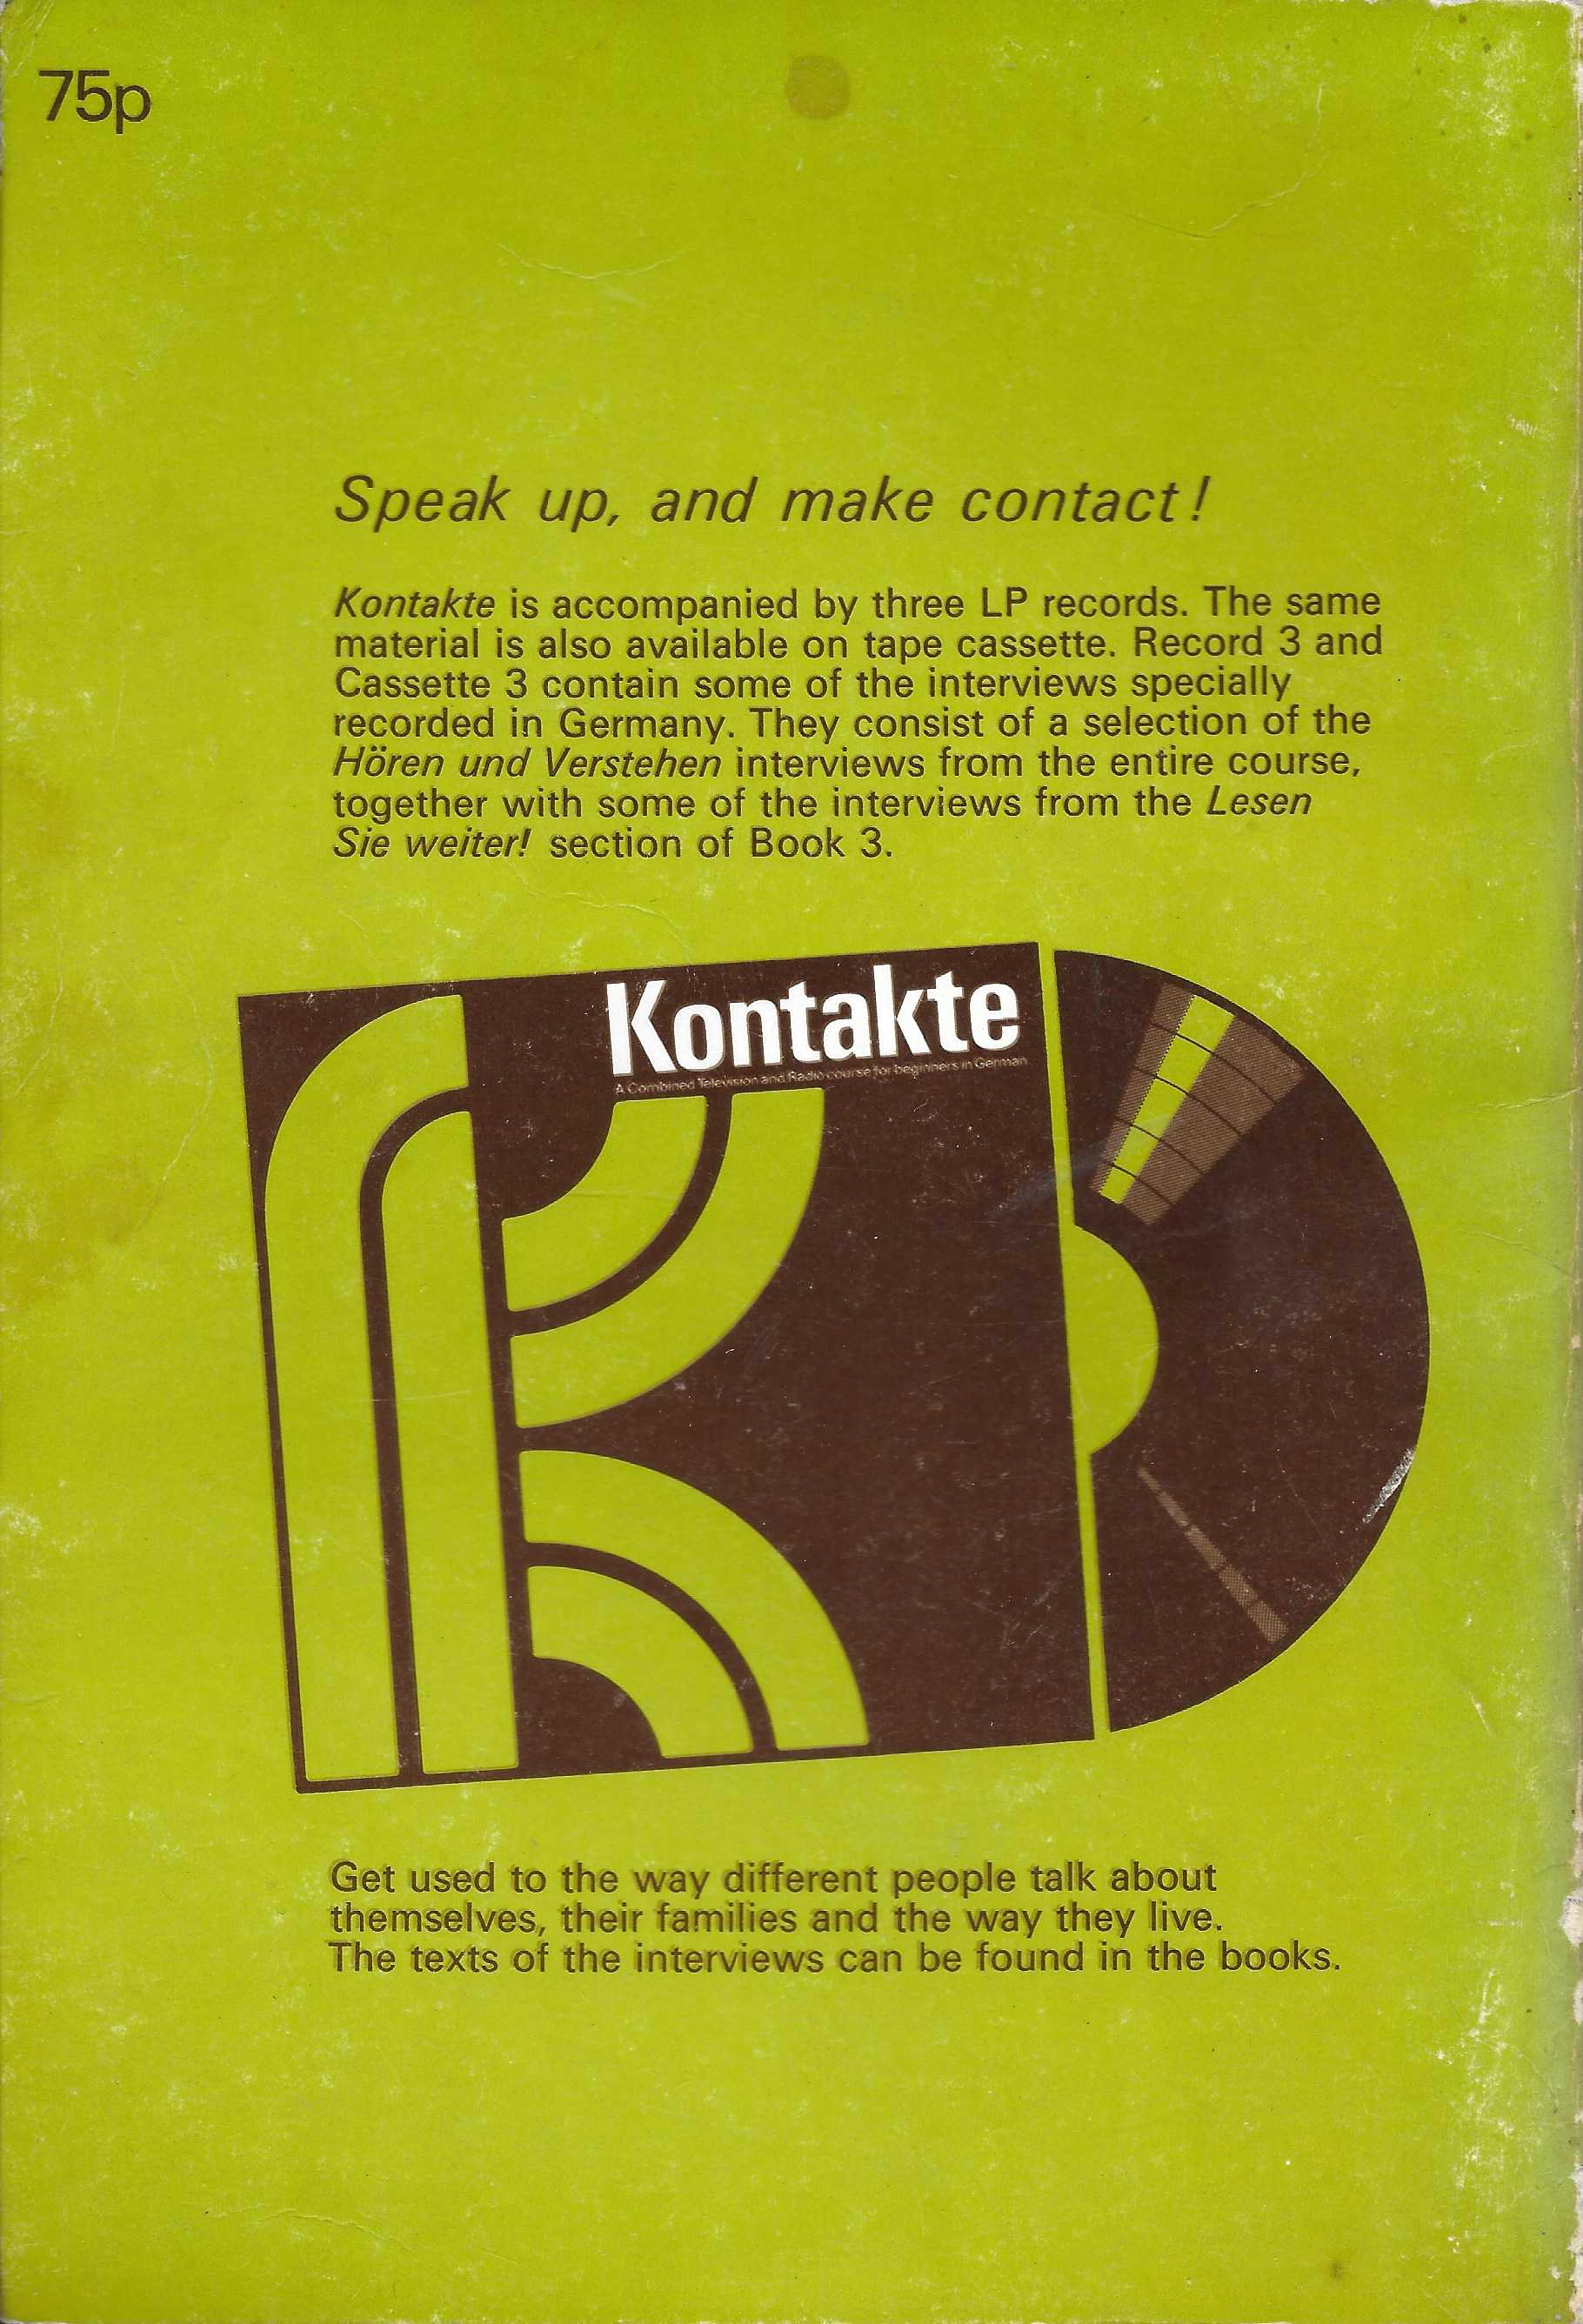 Picture of ISBN 0 563 10865 7 Kontakte 3 by artist Antony Peck from the BBC records and Tapes library